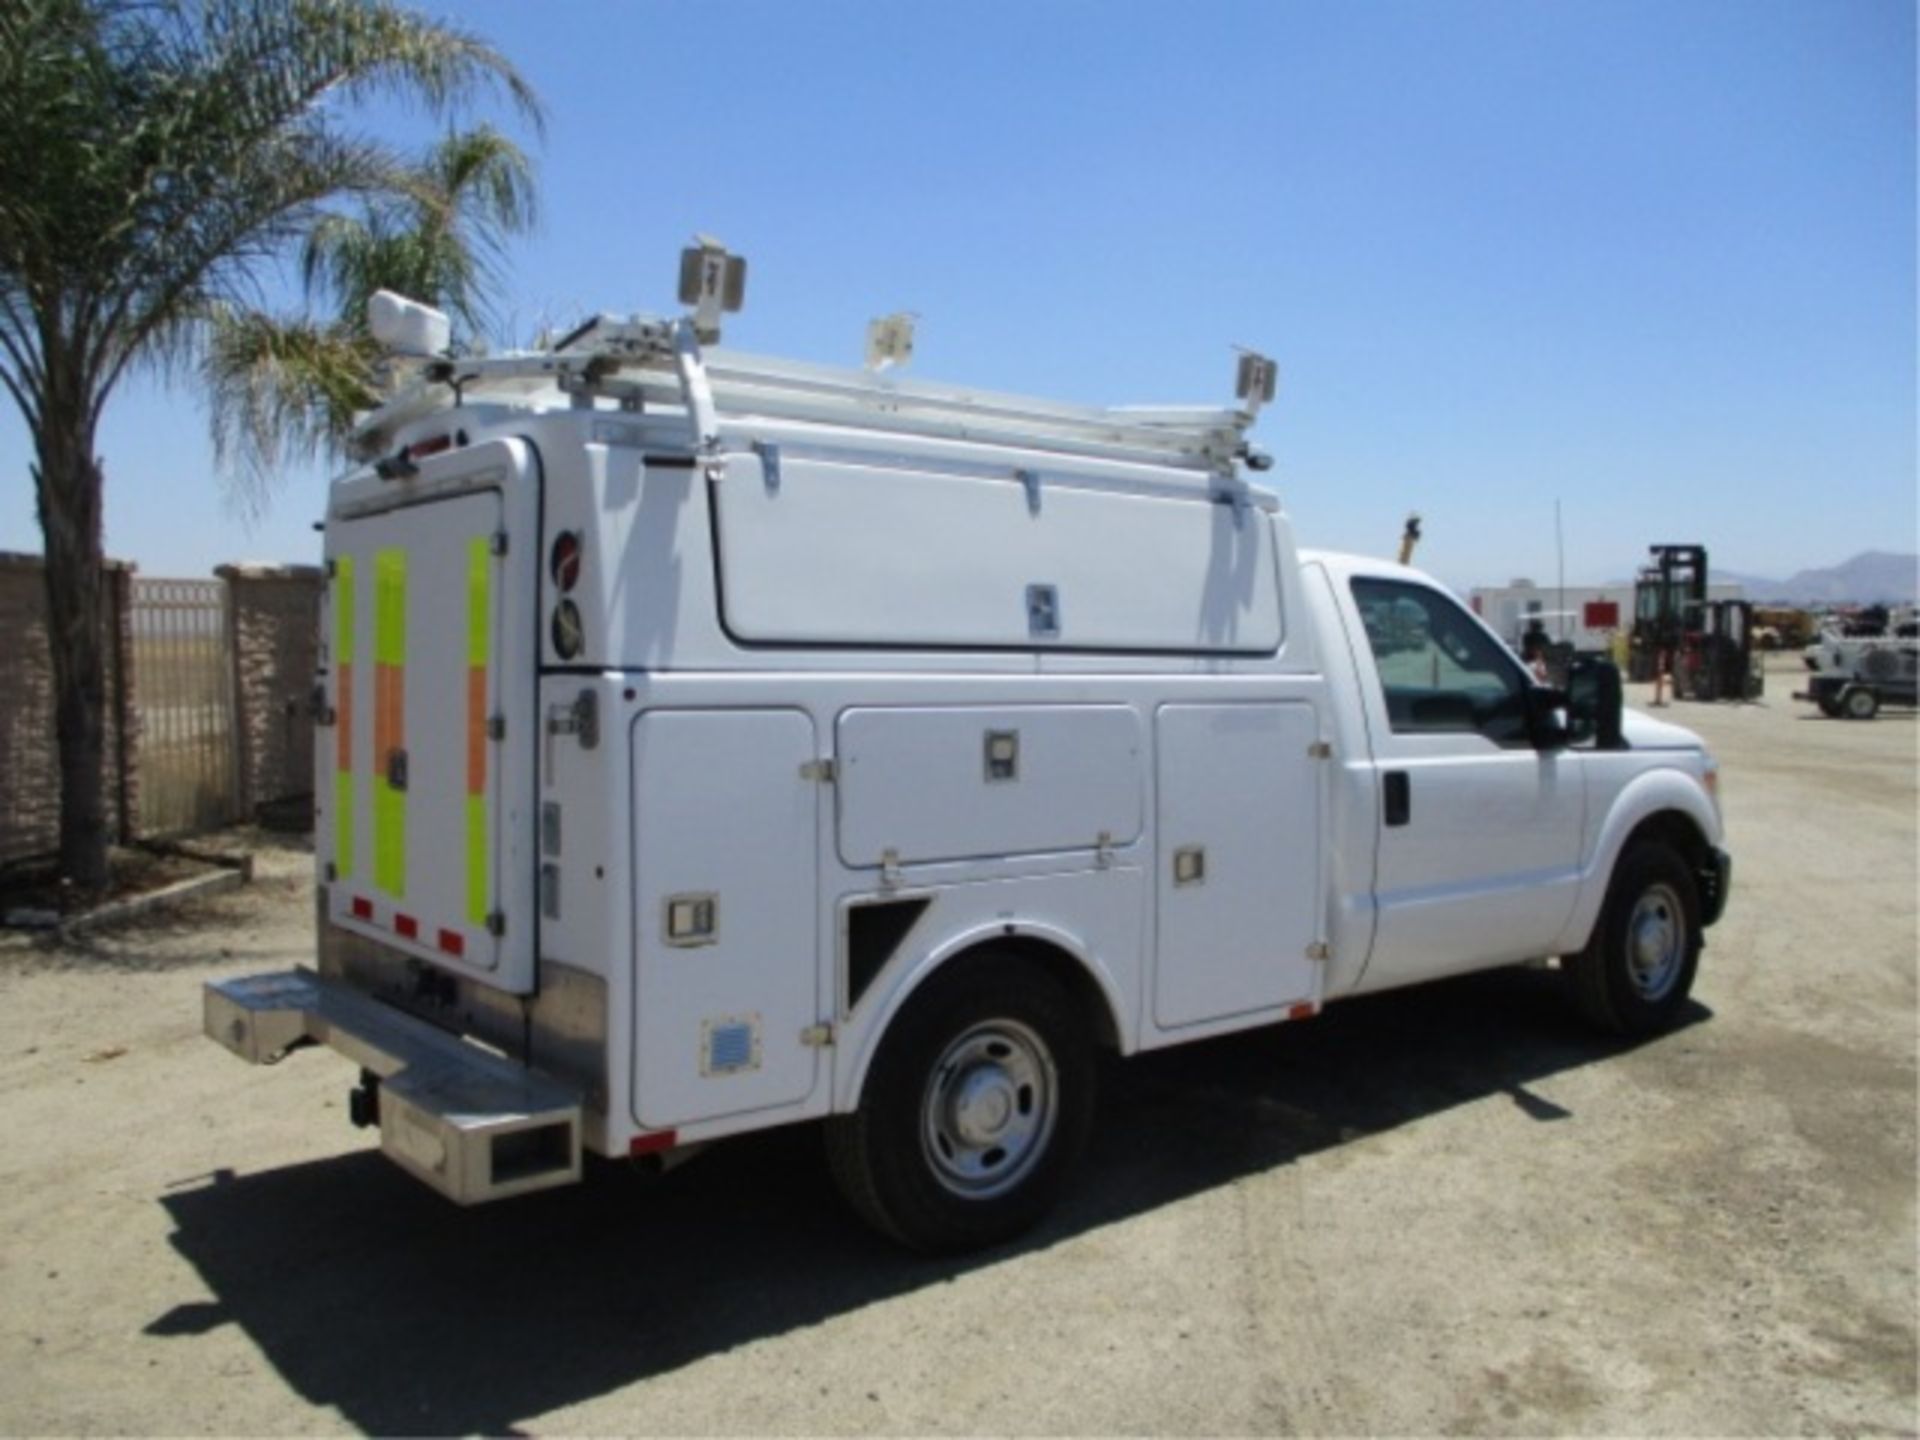 2013 Ford F350 SD Utility Truck, 6.2L V8 Gas, Automatic, Enclosed Utility Body, Onan Gas - Image 19 of 84